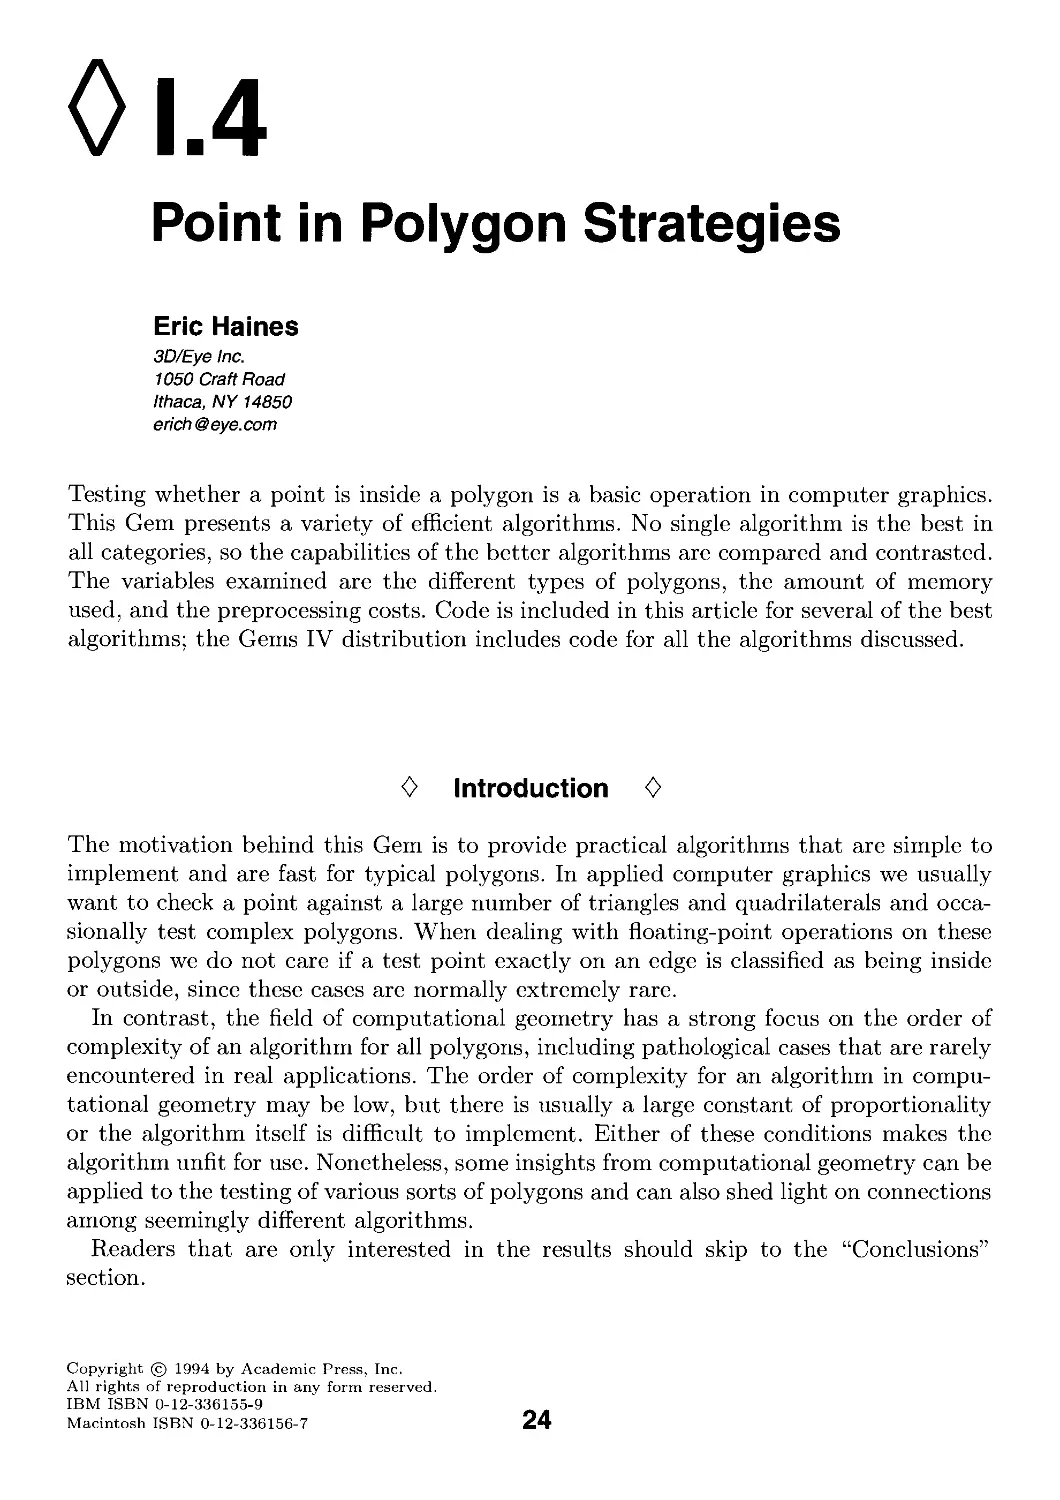 I.4. Point in Polygon Strategies by Eric Haines